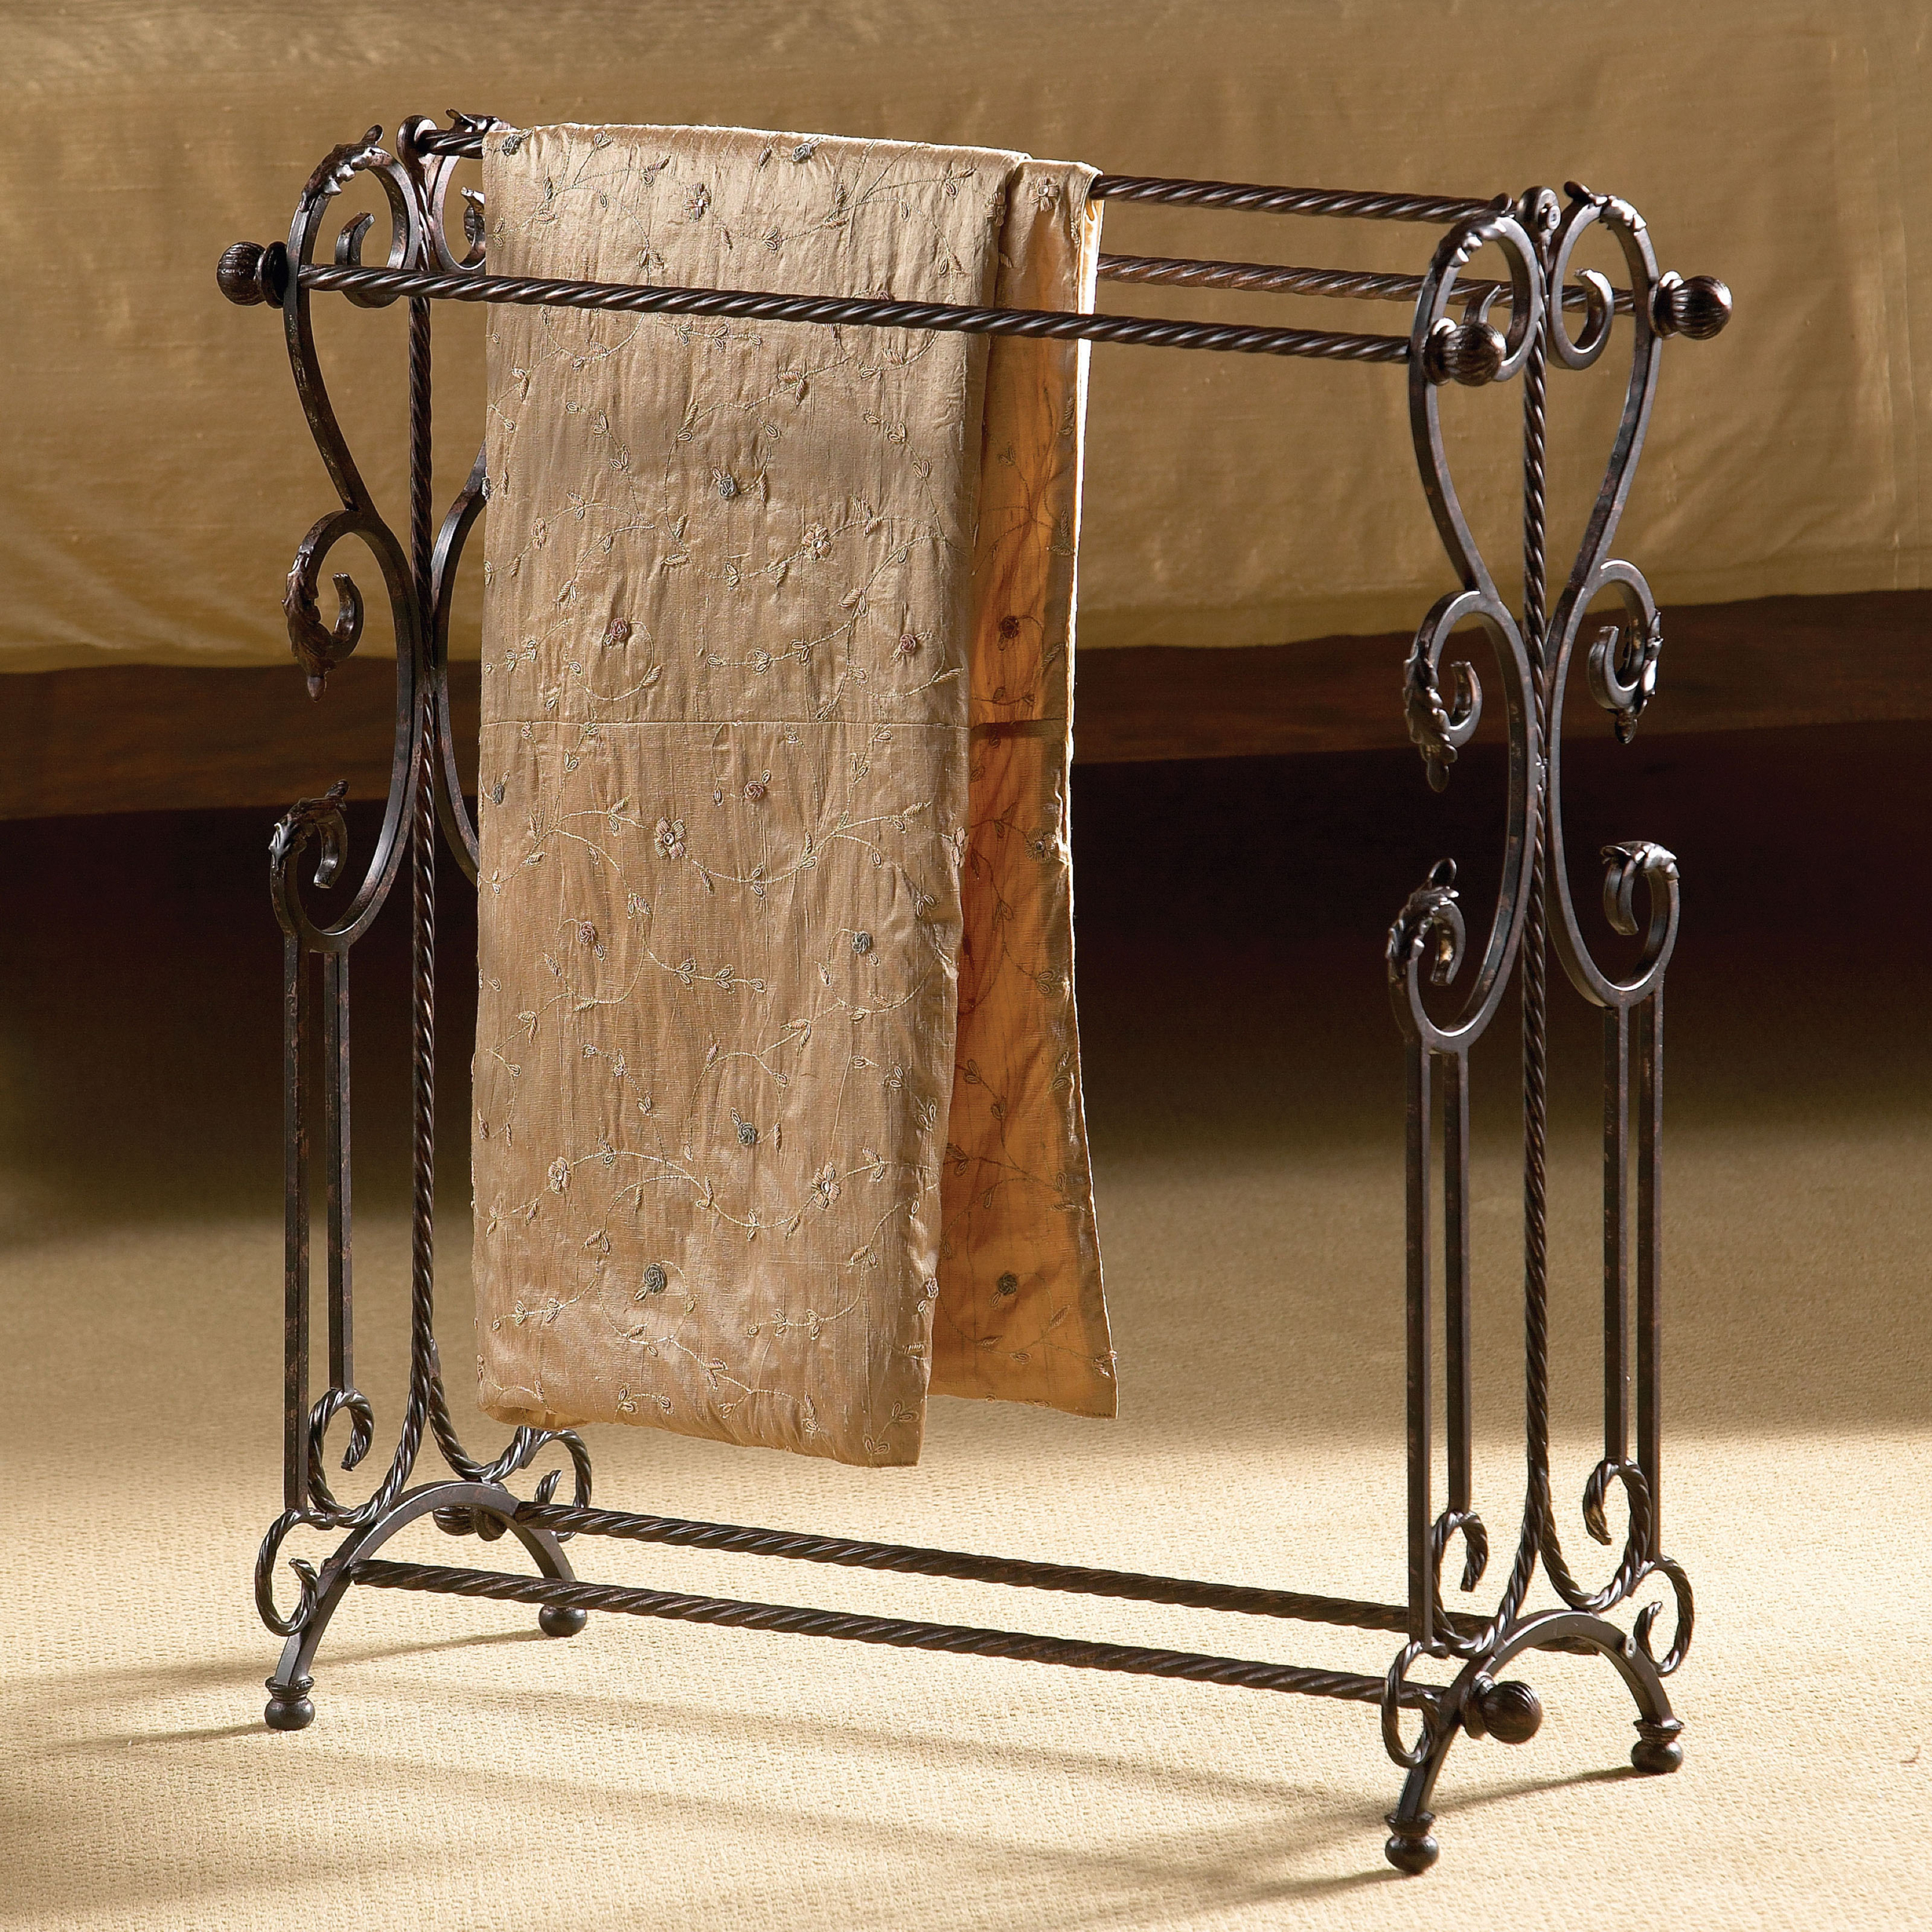 Wrought iron quilt rack